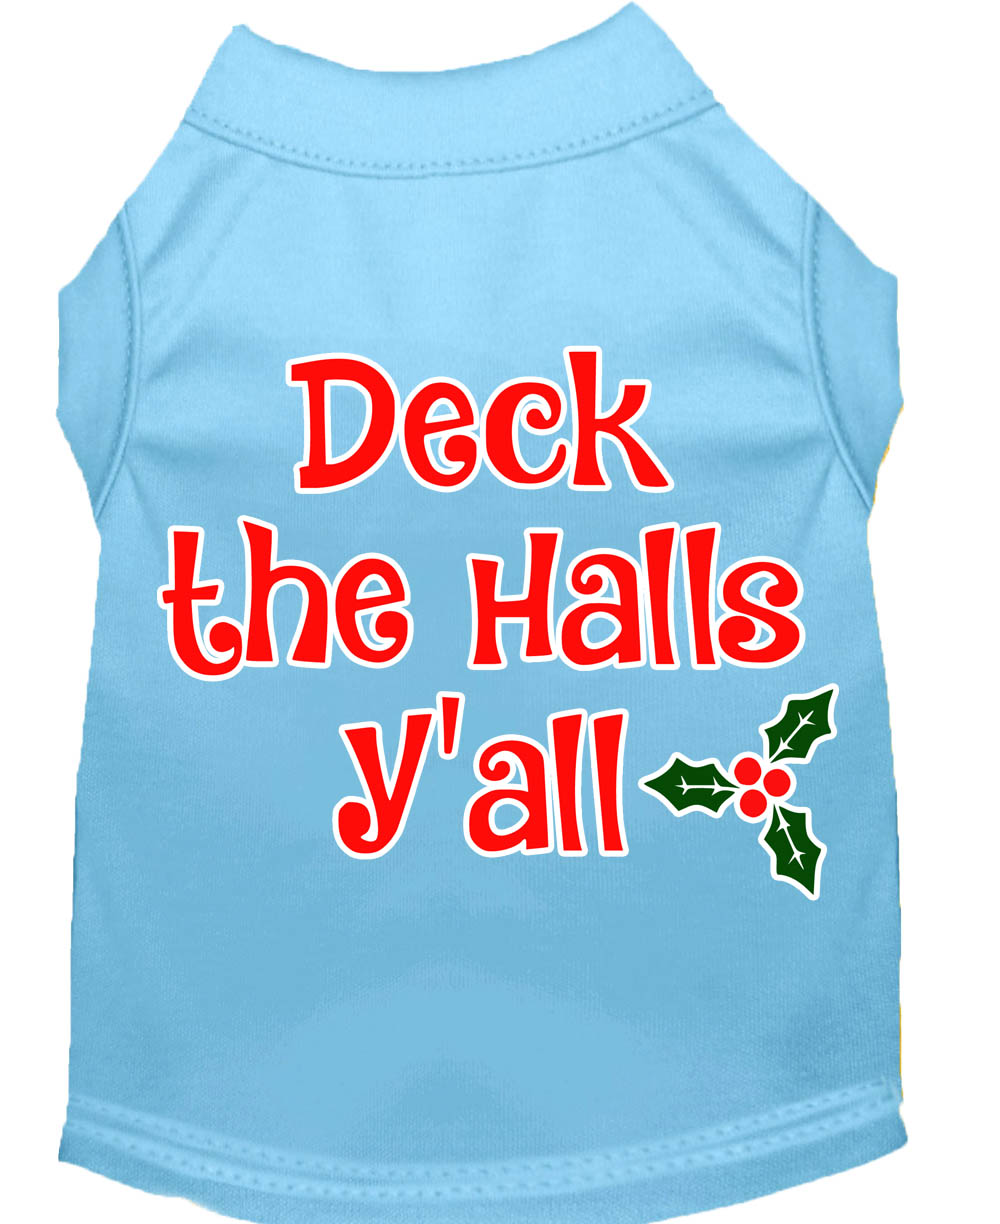 Deck the Halls Y'all Screen Print Dog Shirt Baby Blue Med